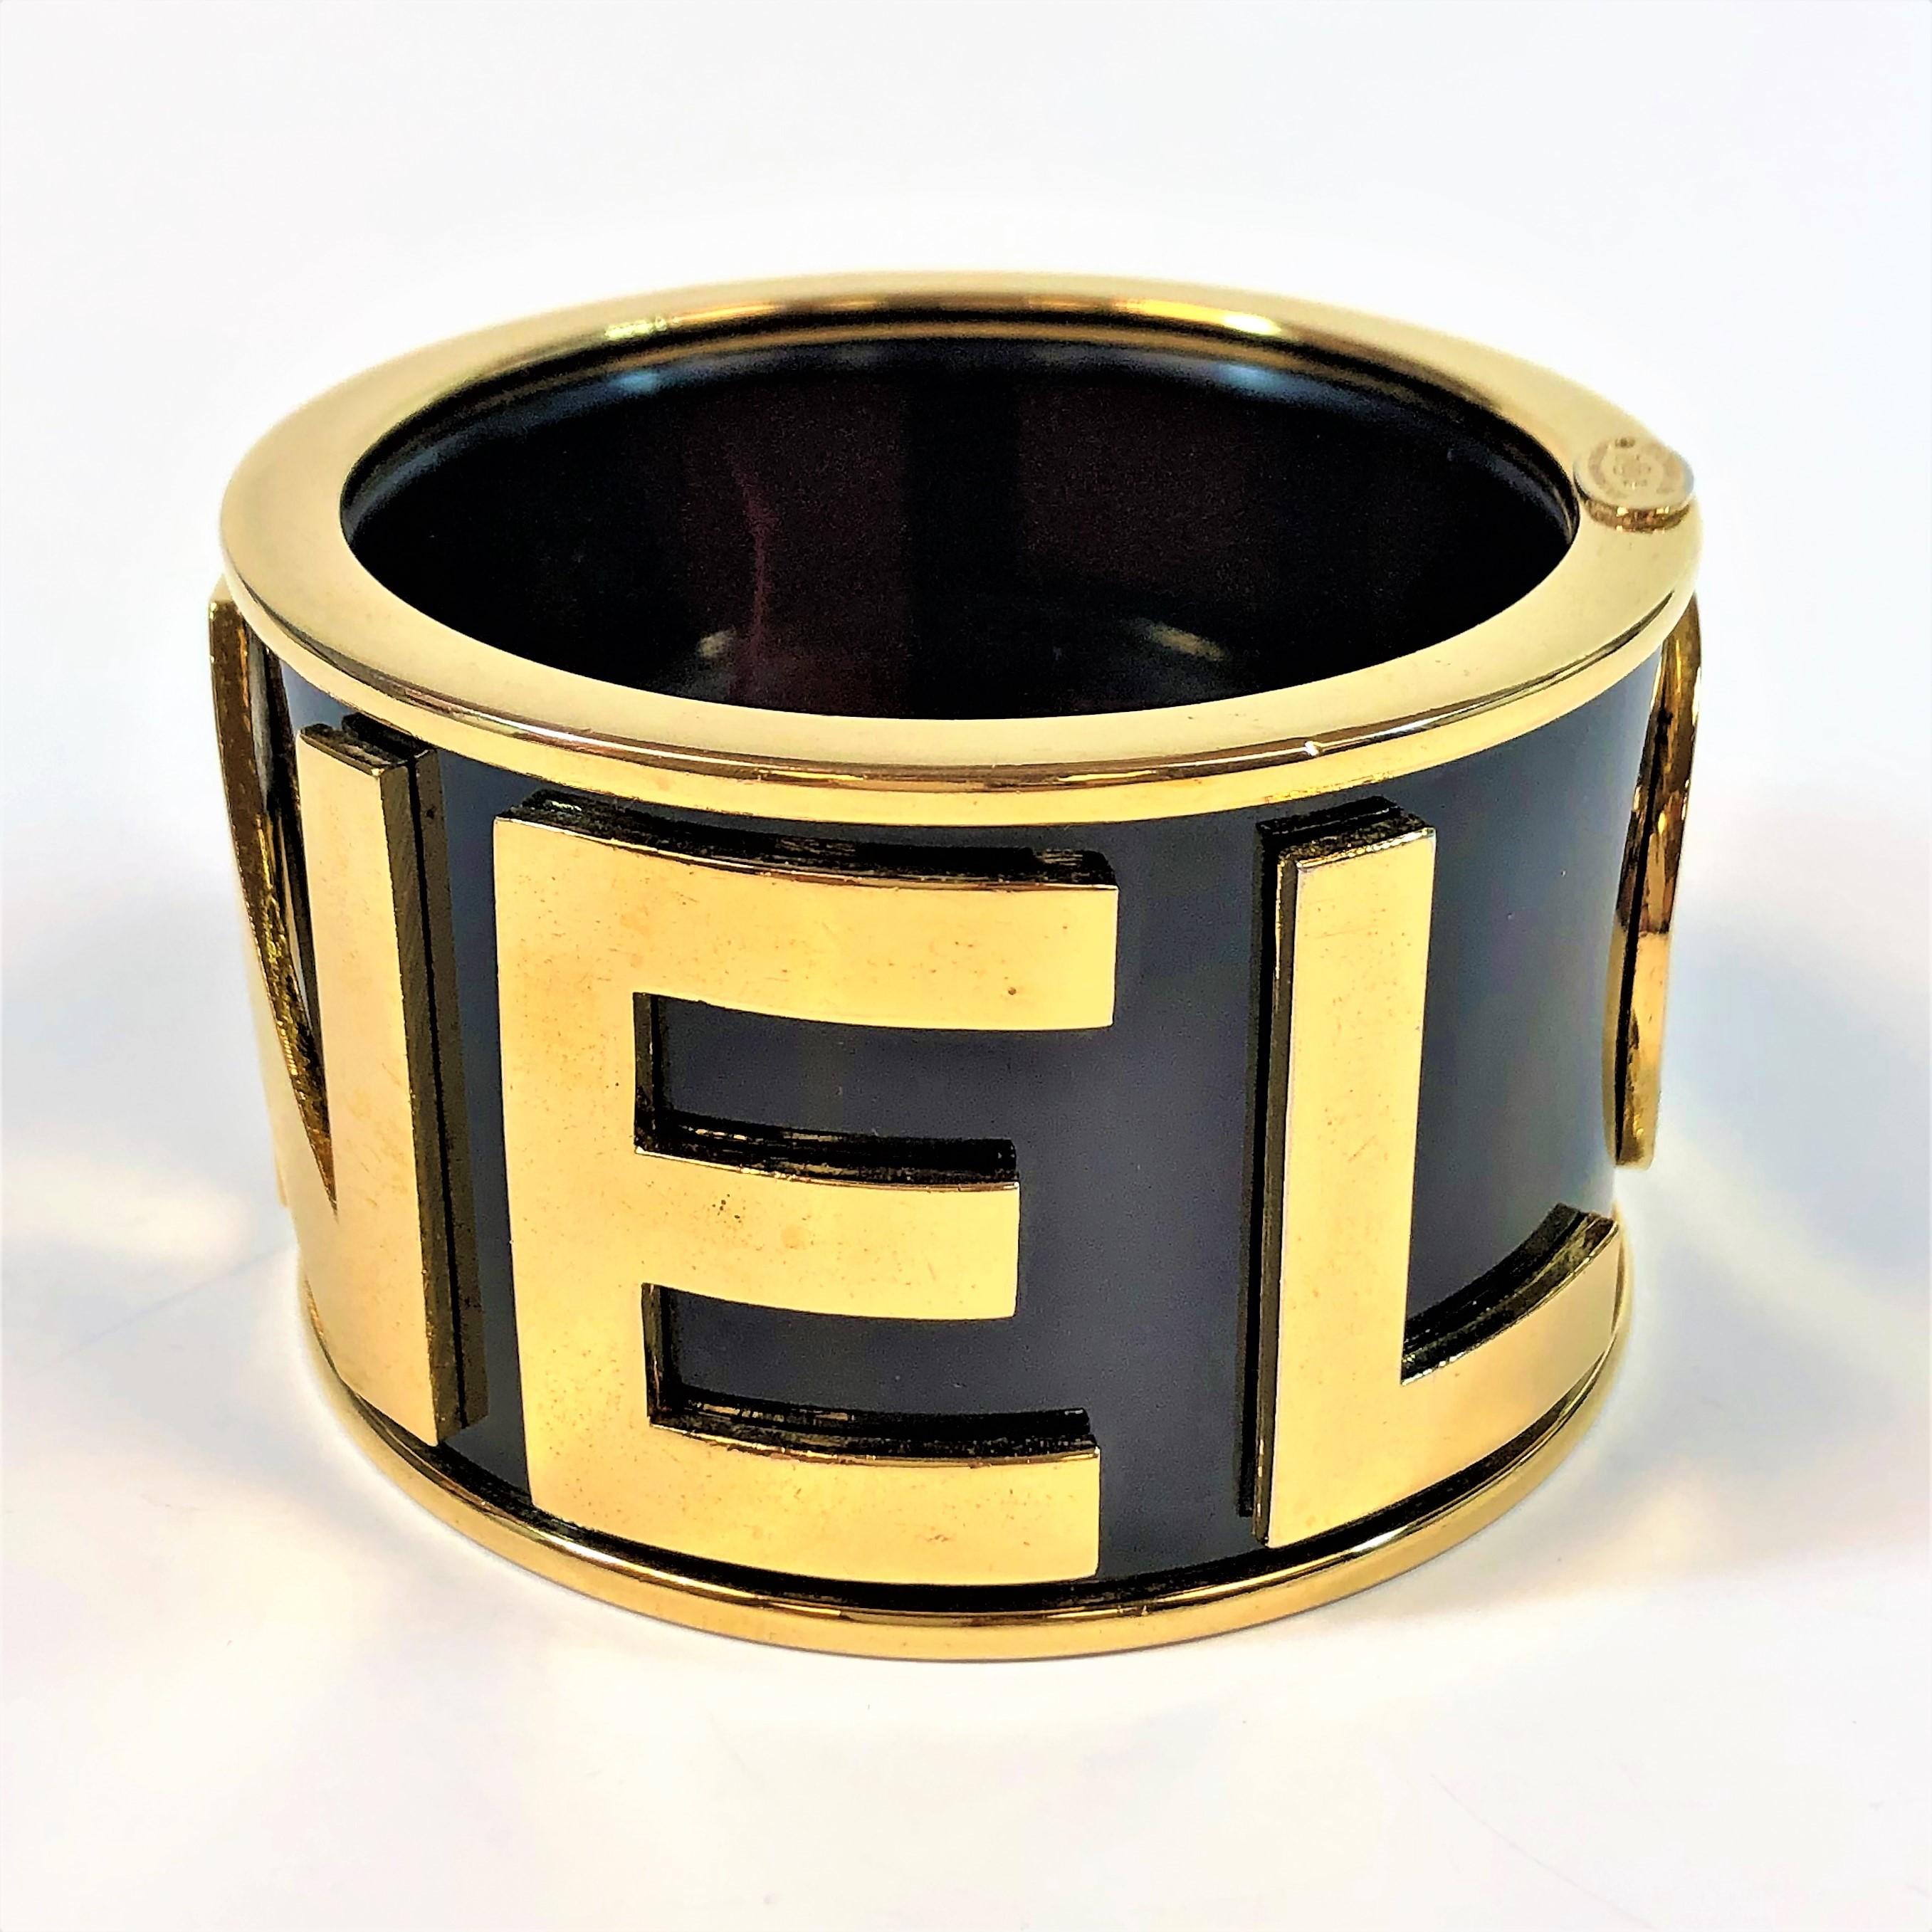 Modern Chanel Runway 1986 Large Black Cuff With CHANEL Spelled out  in Gold Tone  